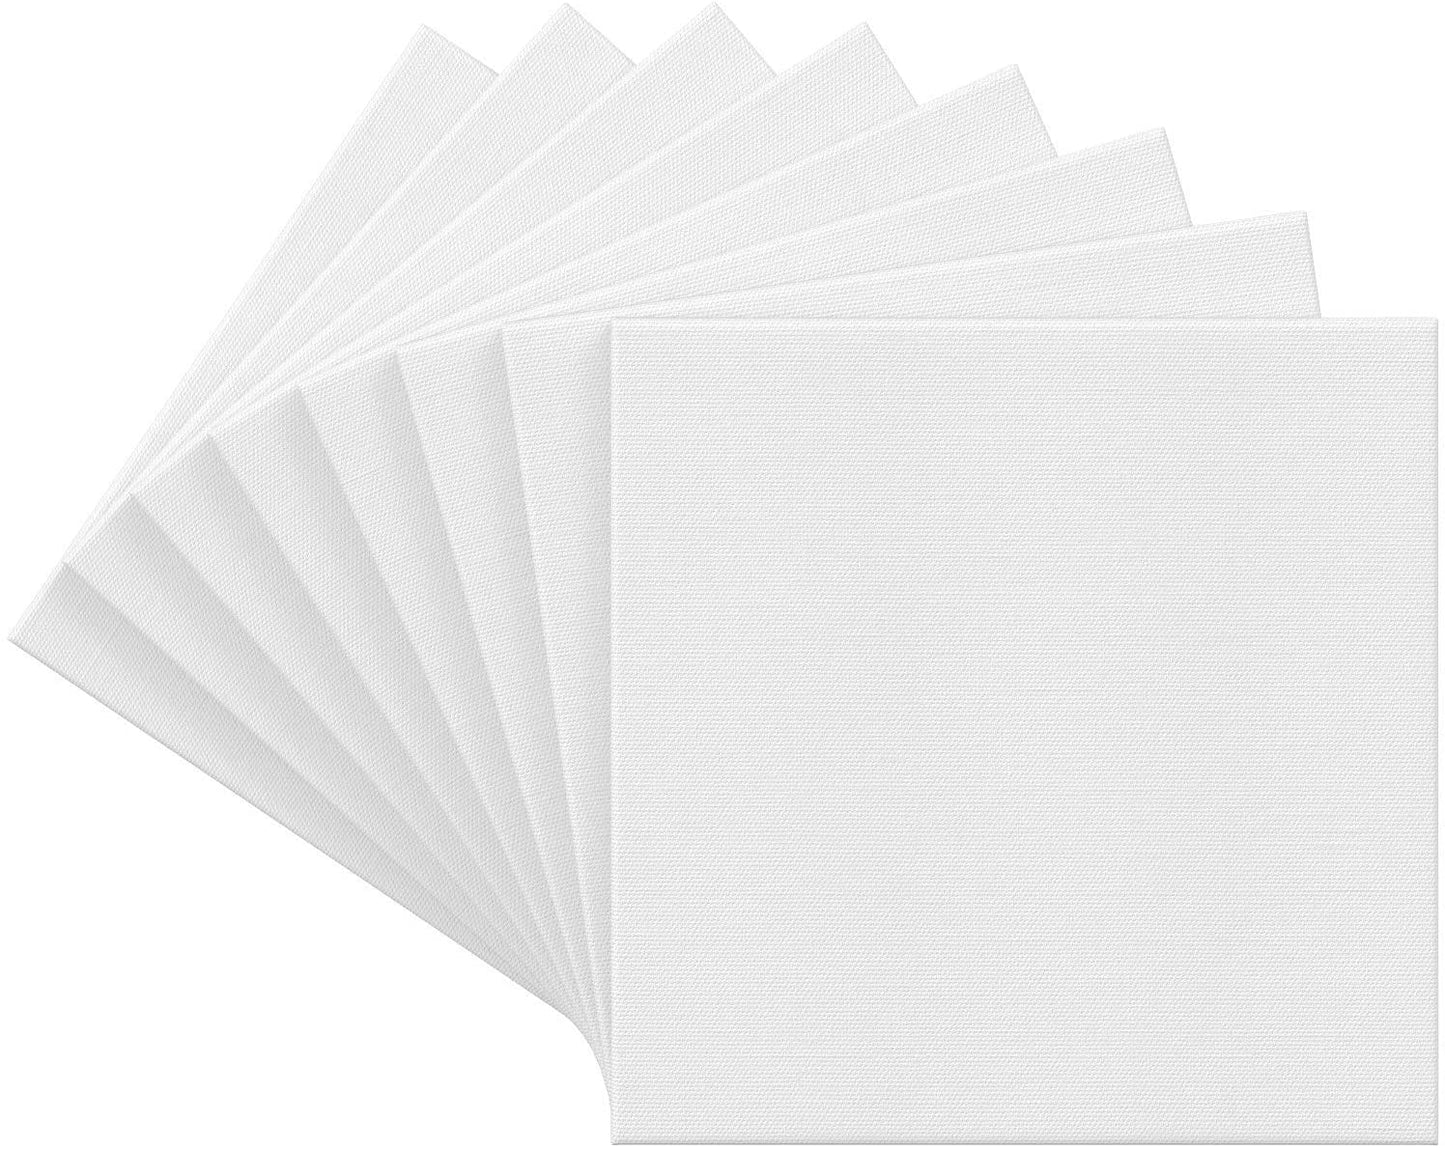 Premium Stretched Canvas, 12" x 12" - Pack of 8